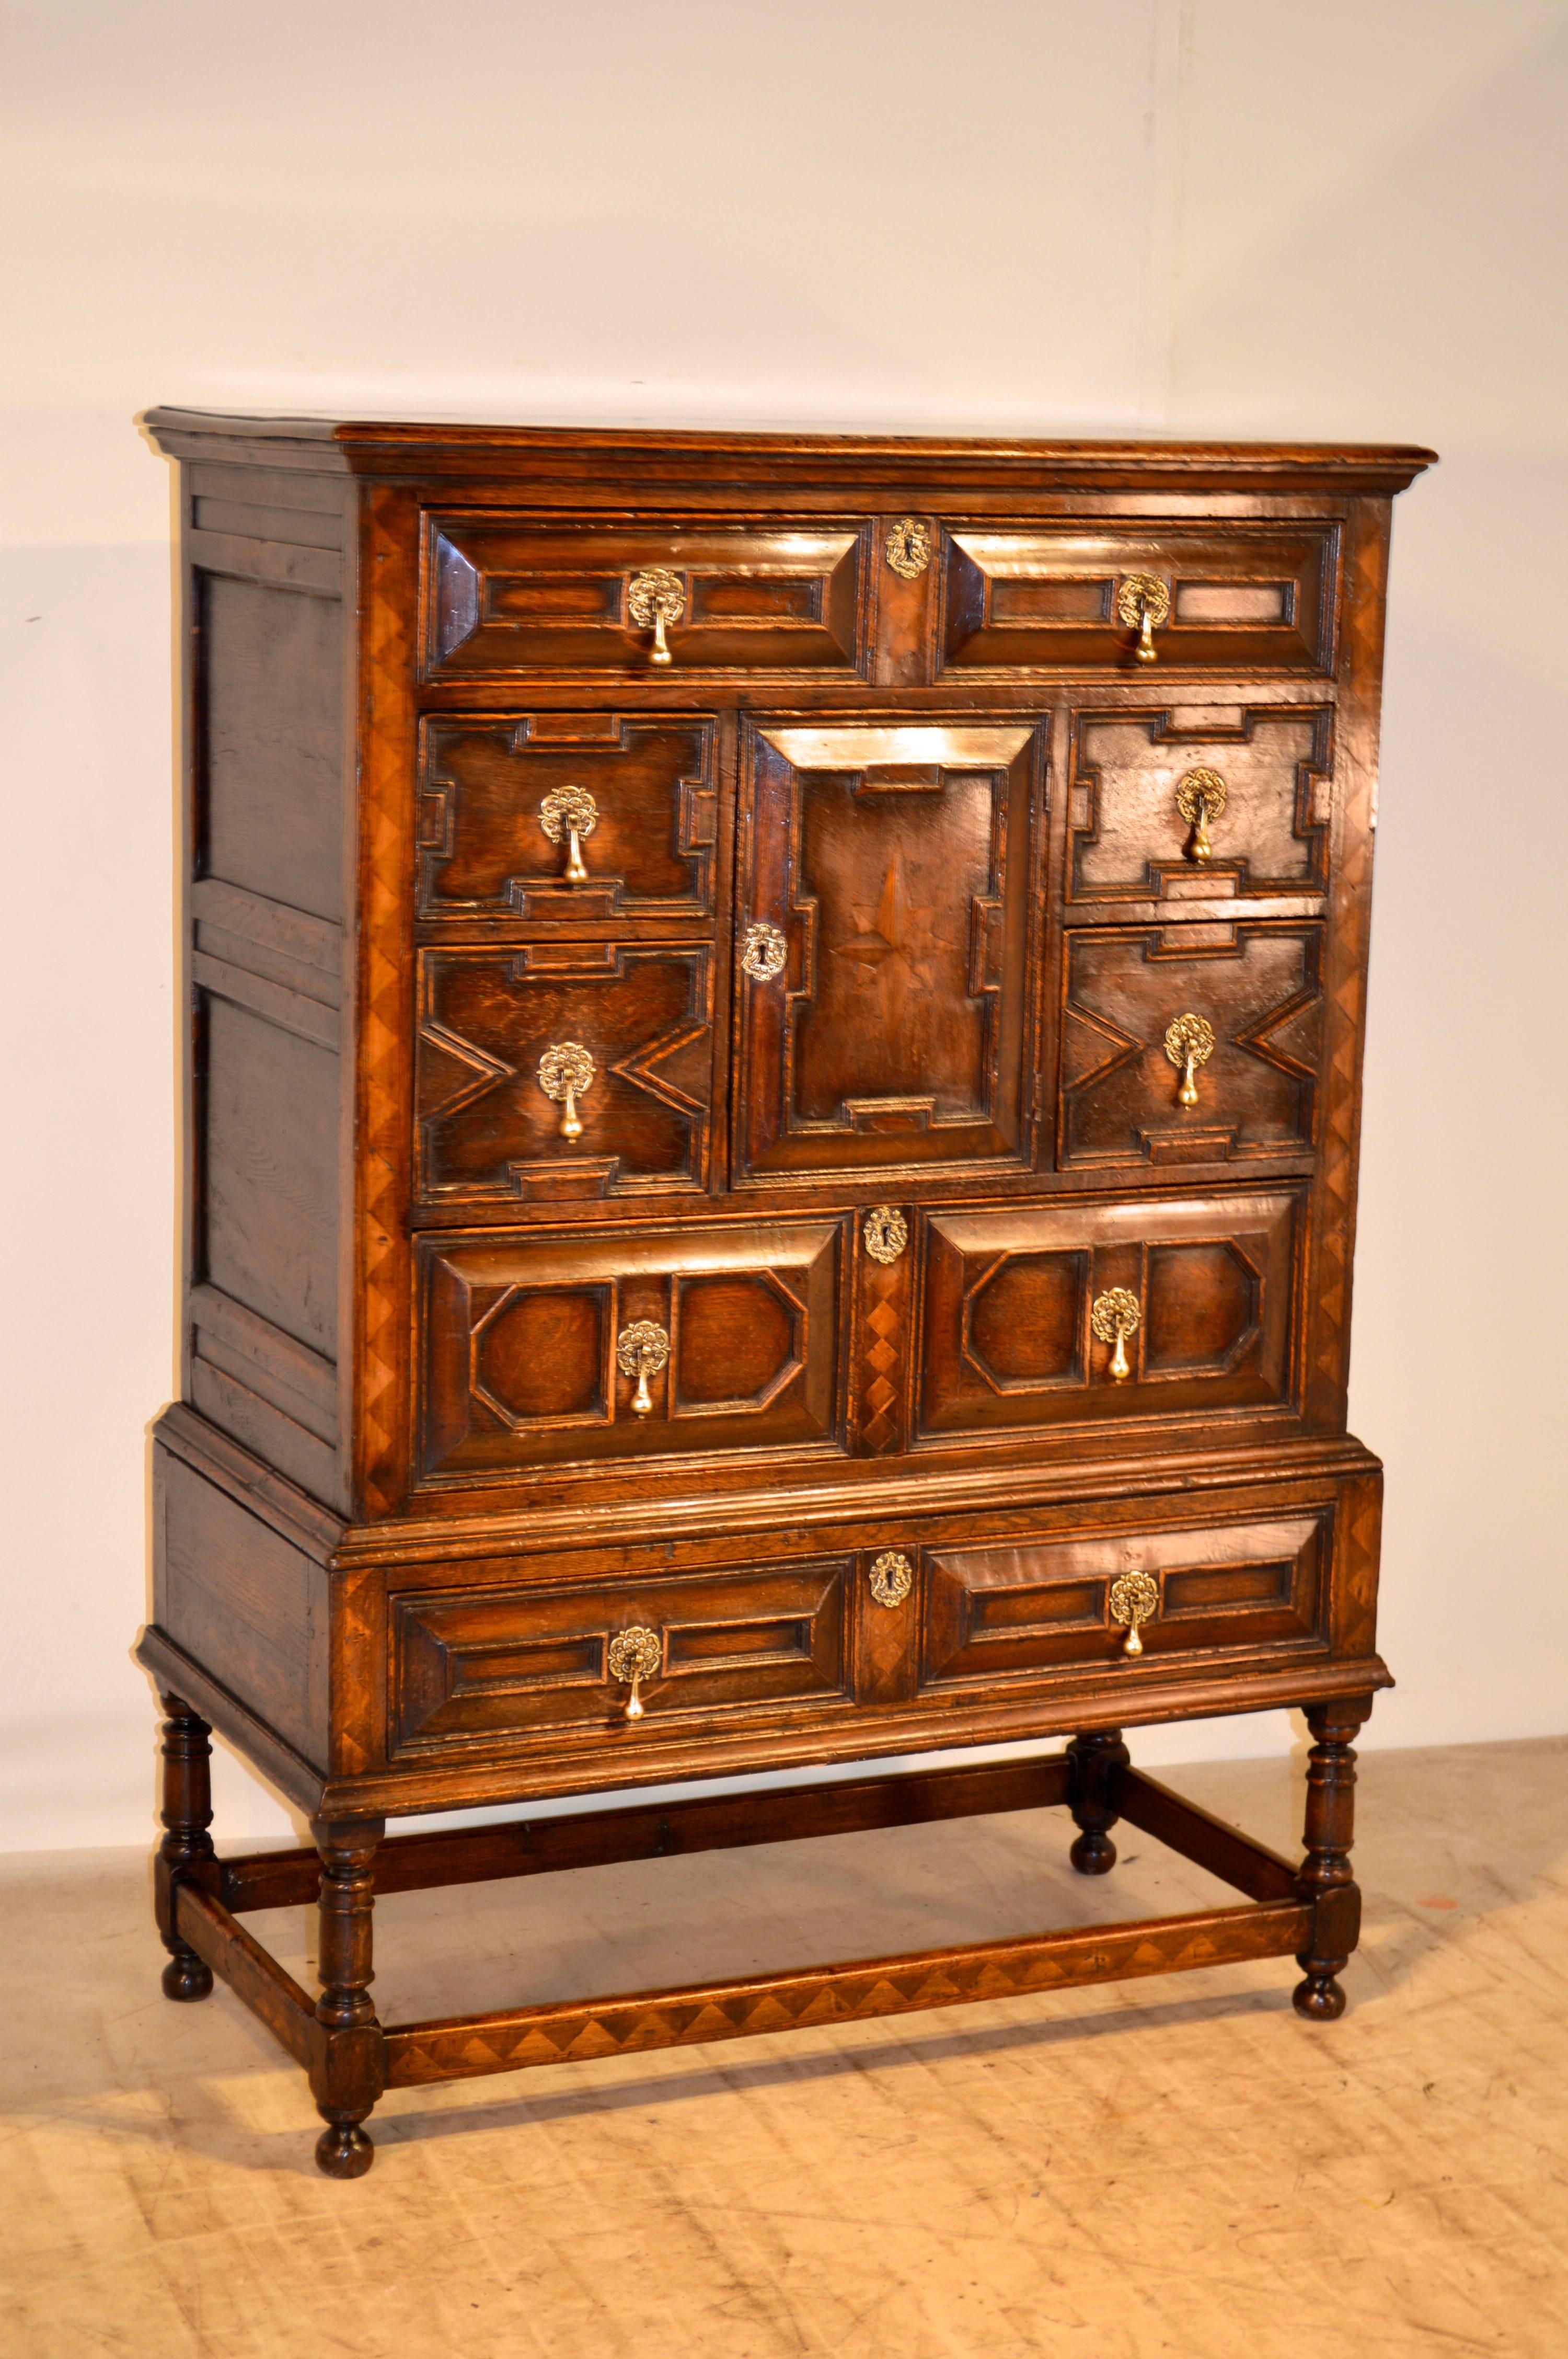 English oak chest on stand made from oak with walnut and satinwood accents, circa 1900. It has a single drawer over a central door flanked by two single drawers on each side, all over two long single drawers. The drawer fronts as well as the door